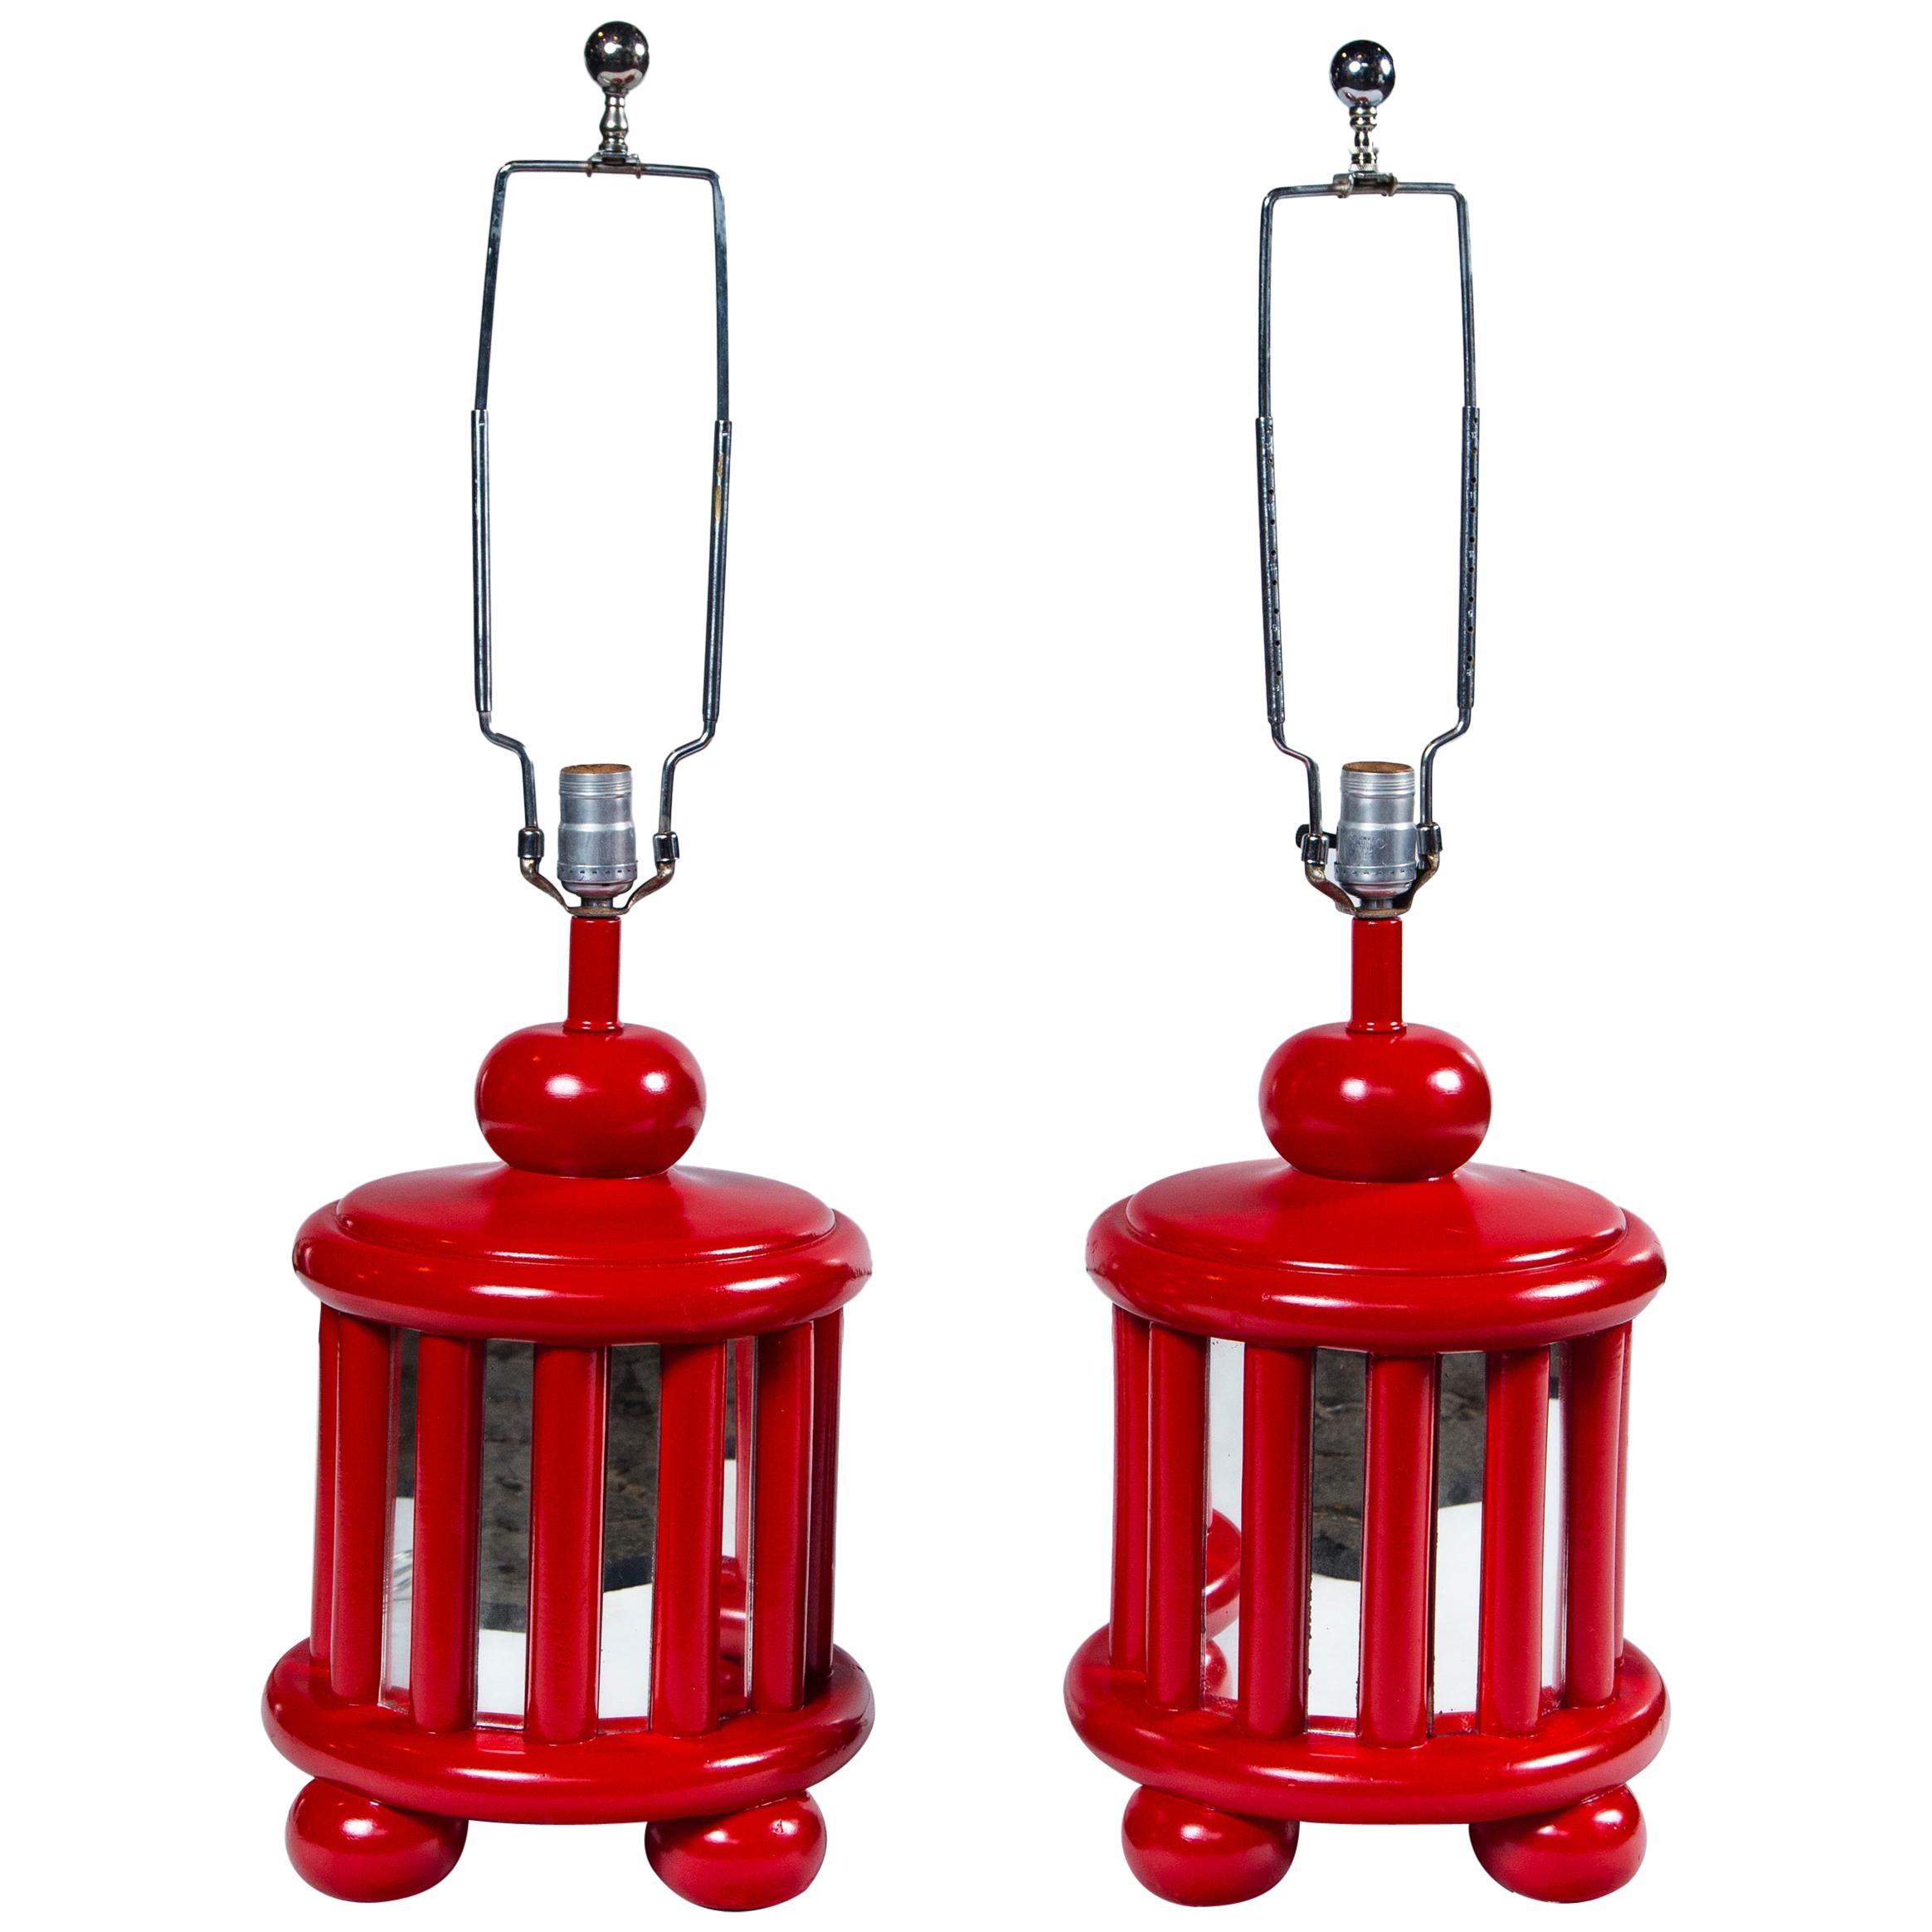 Pair of Midcentury Mirrored Red Lamps